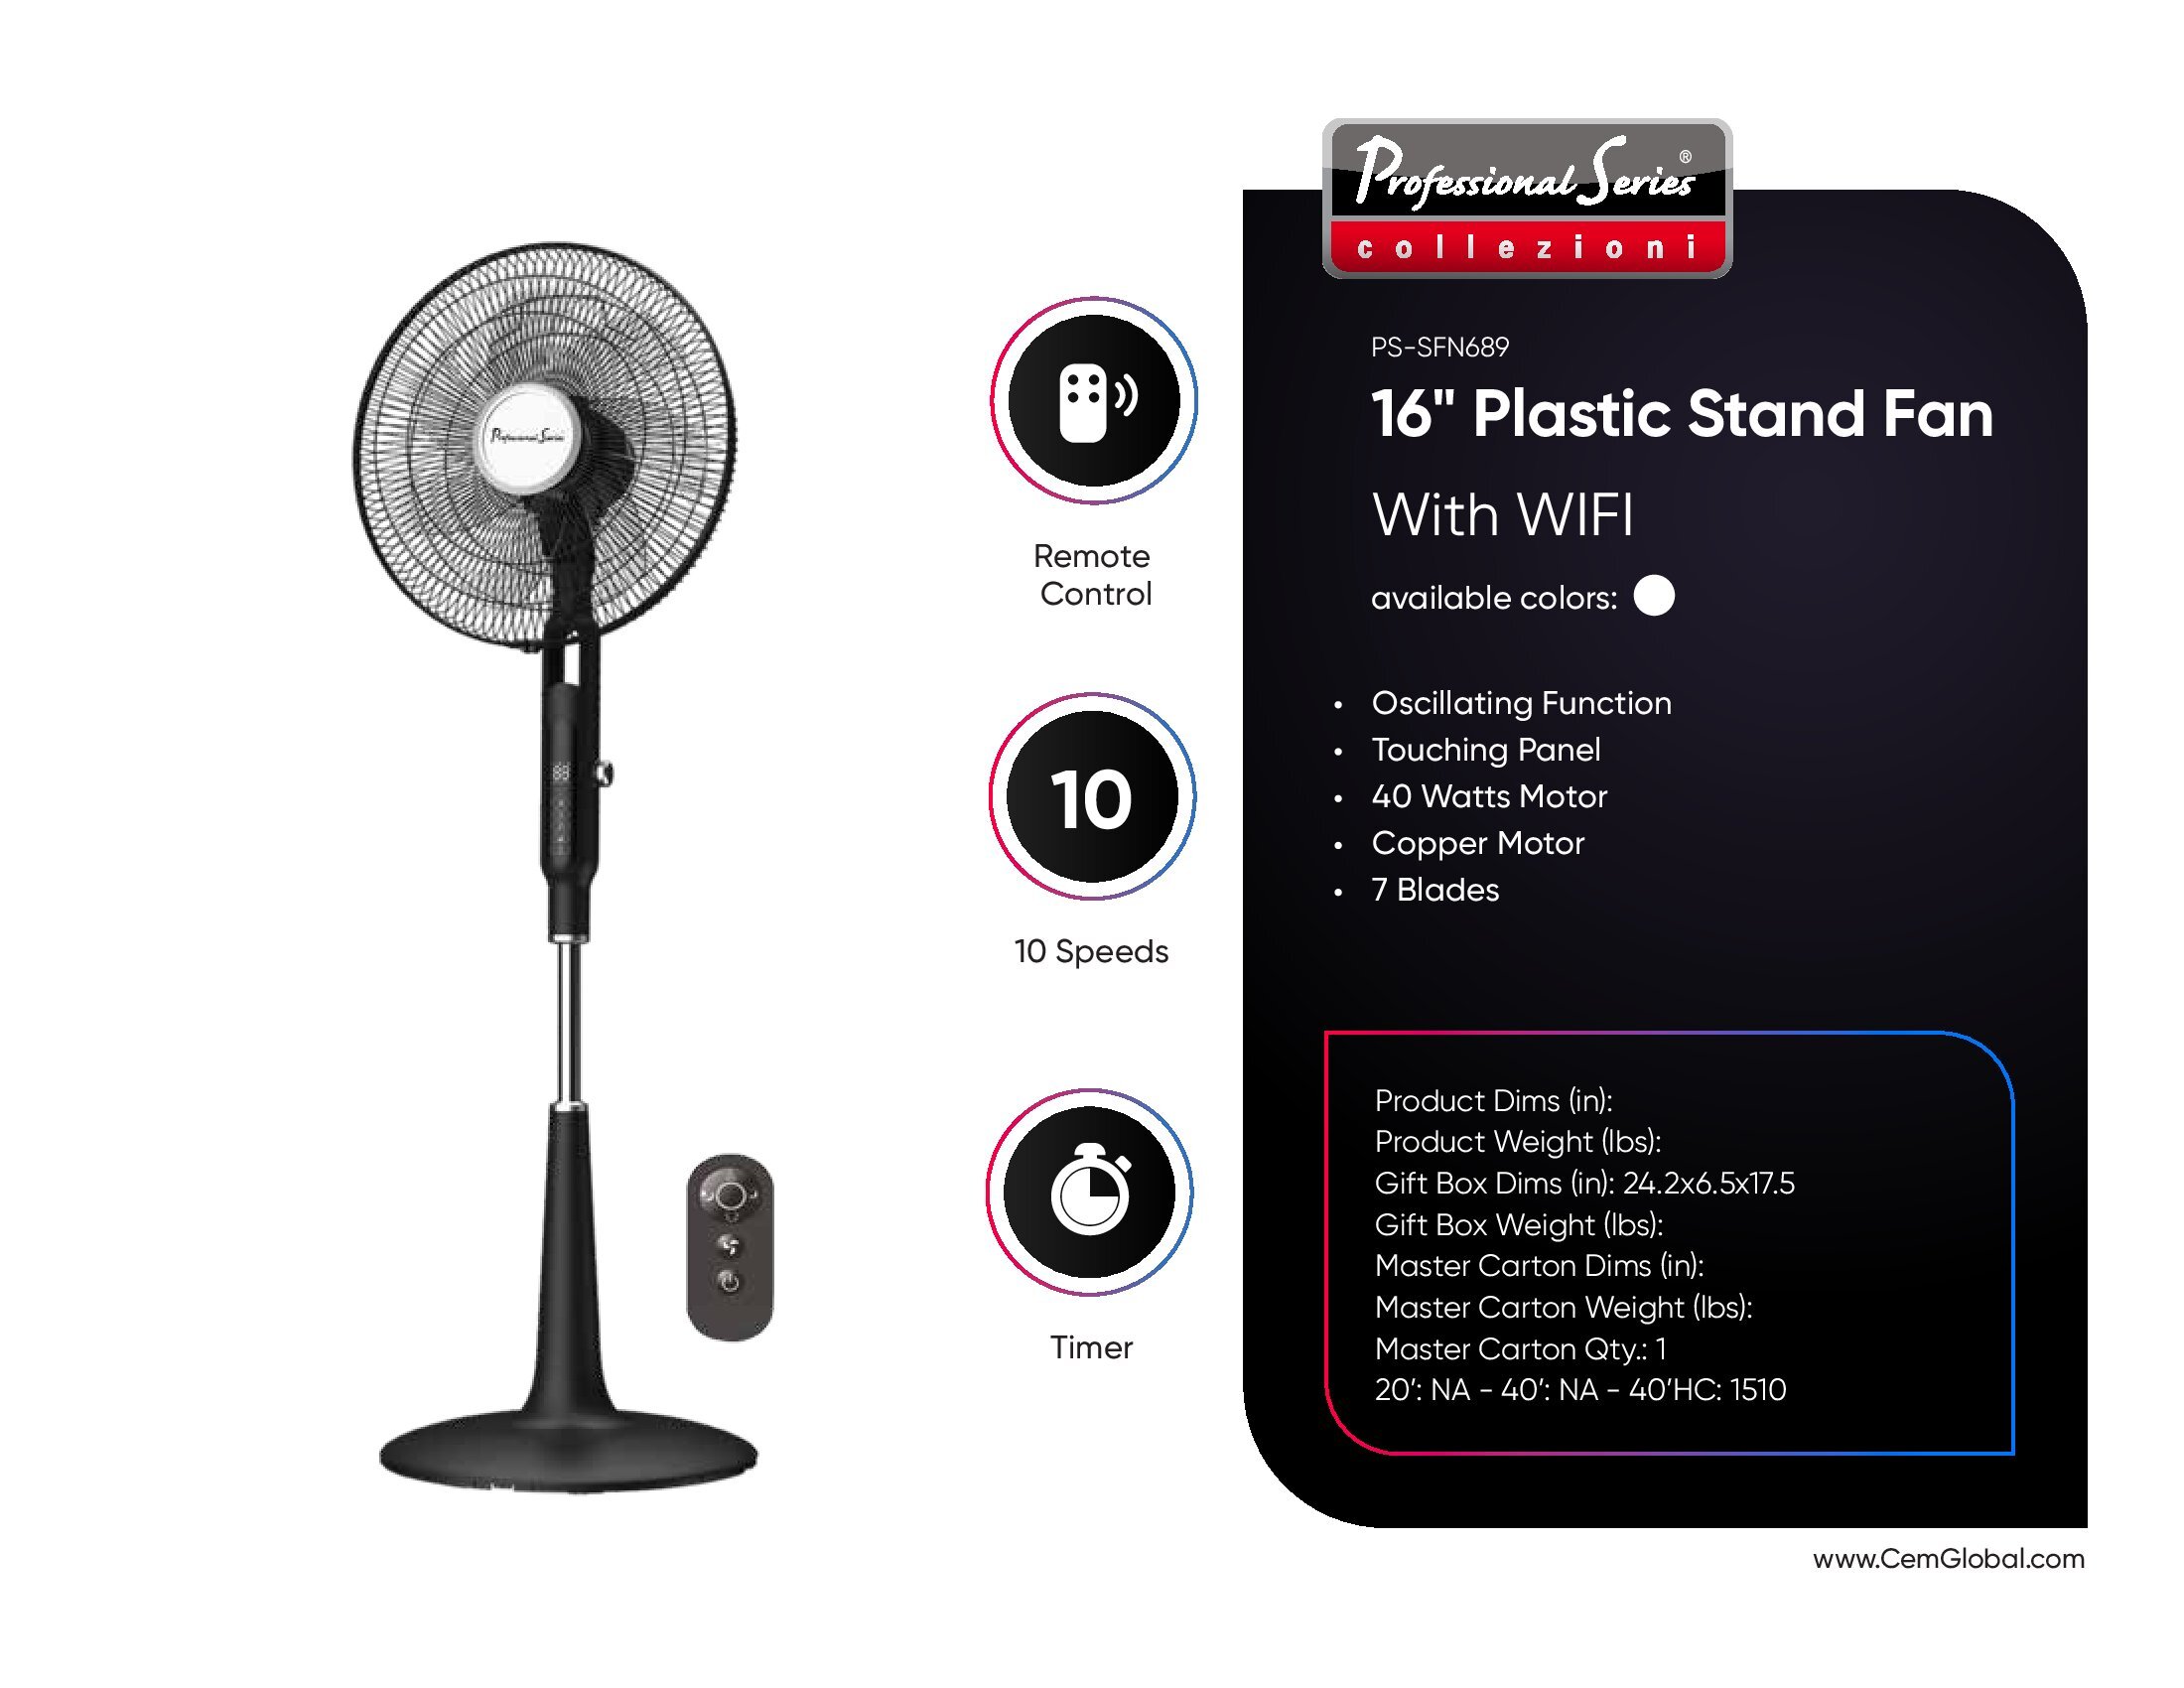 16" Plastic Stand Fan With WIFI